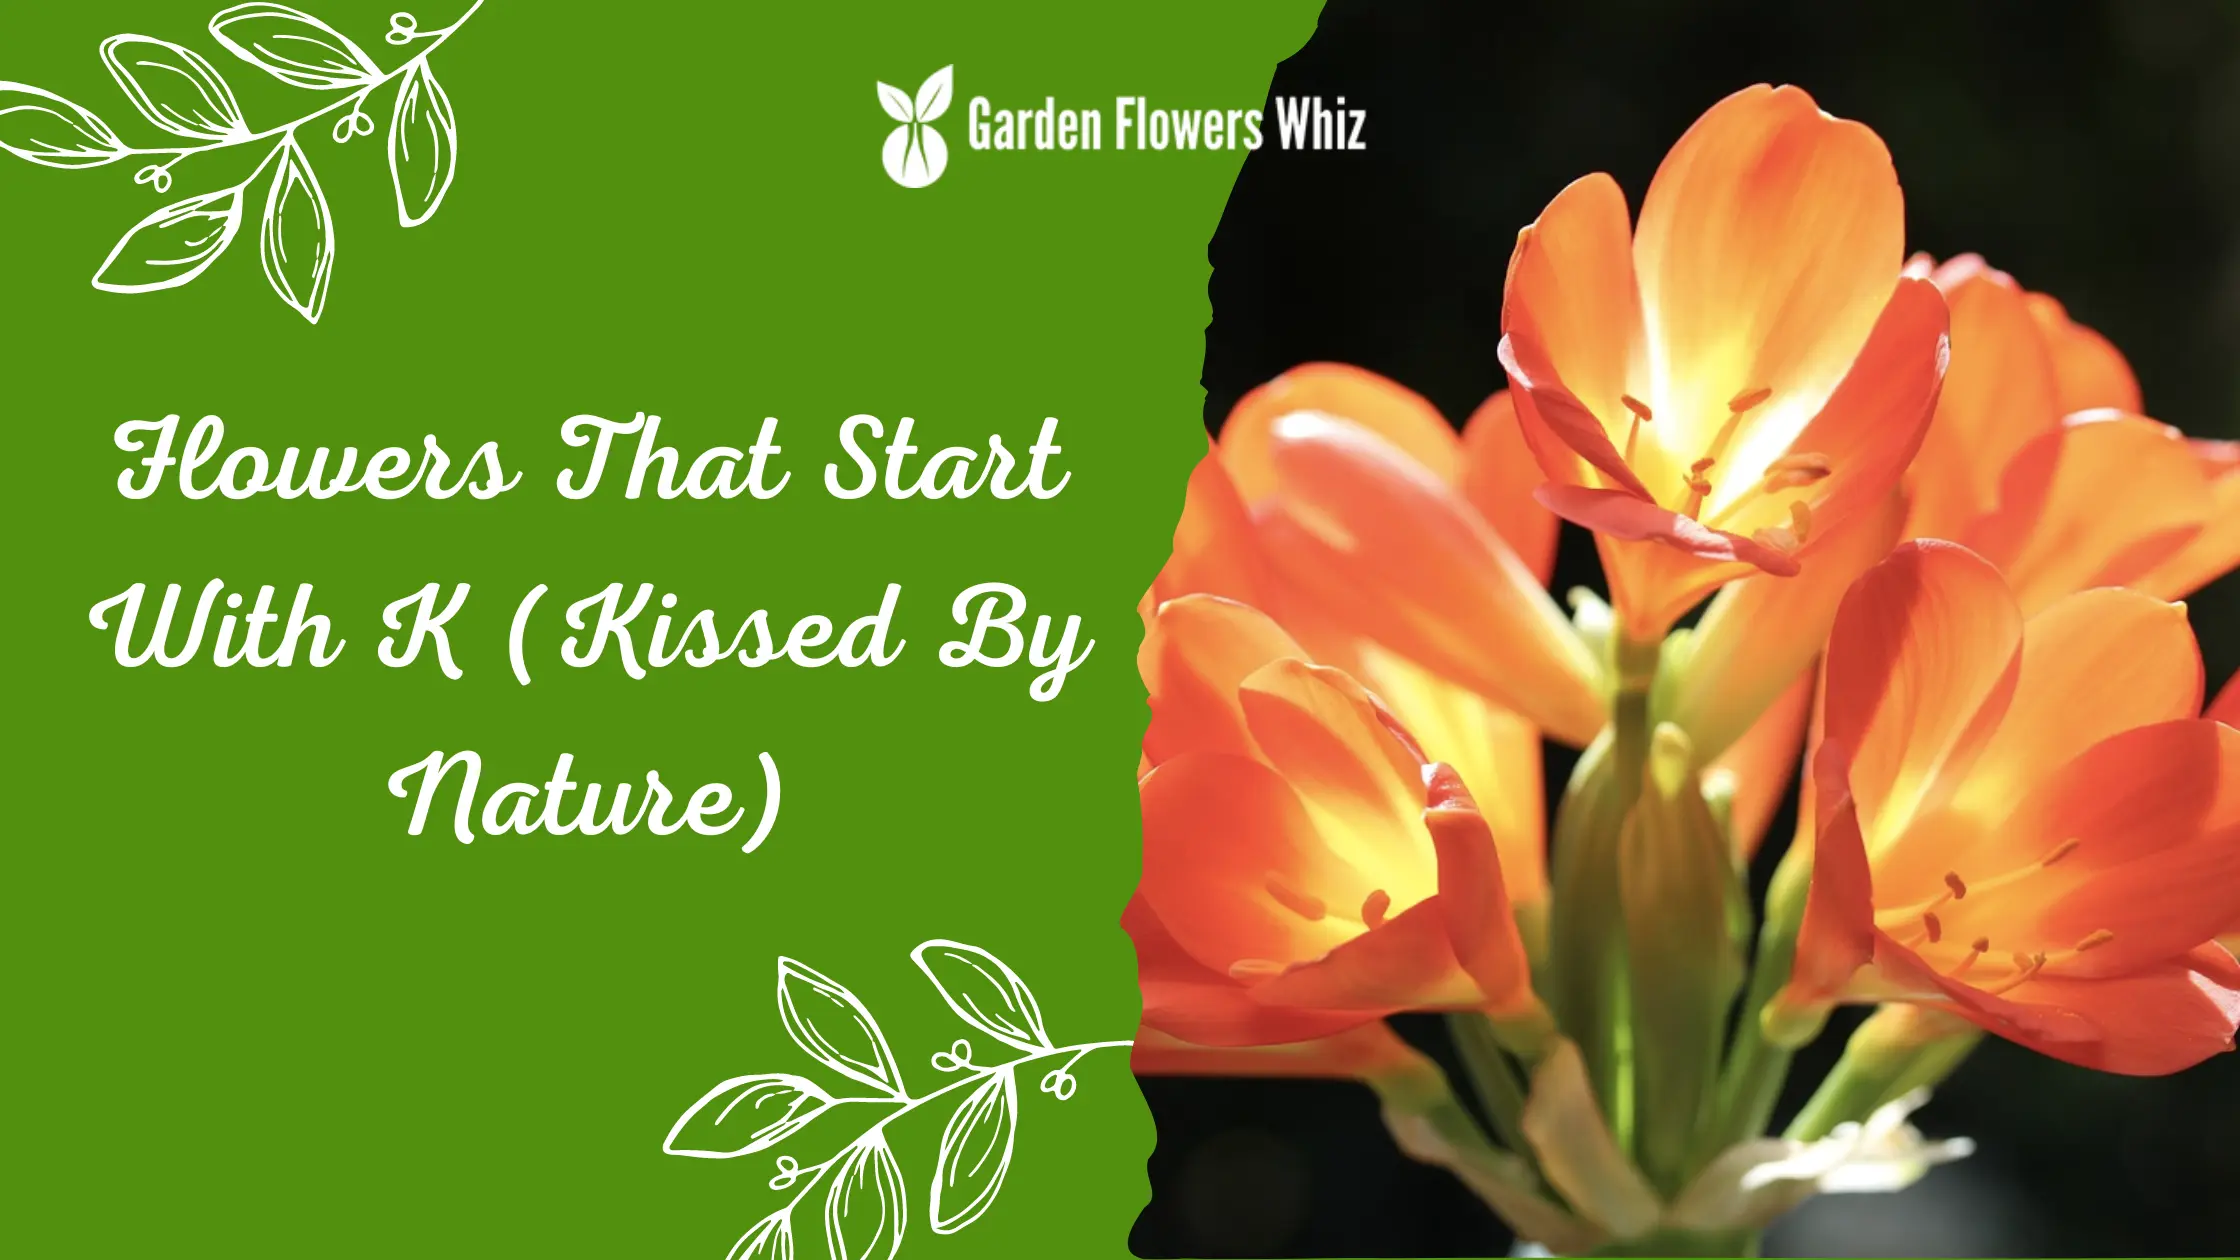 Flowers That Start With K (Kissed By Nature)